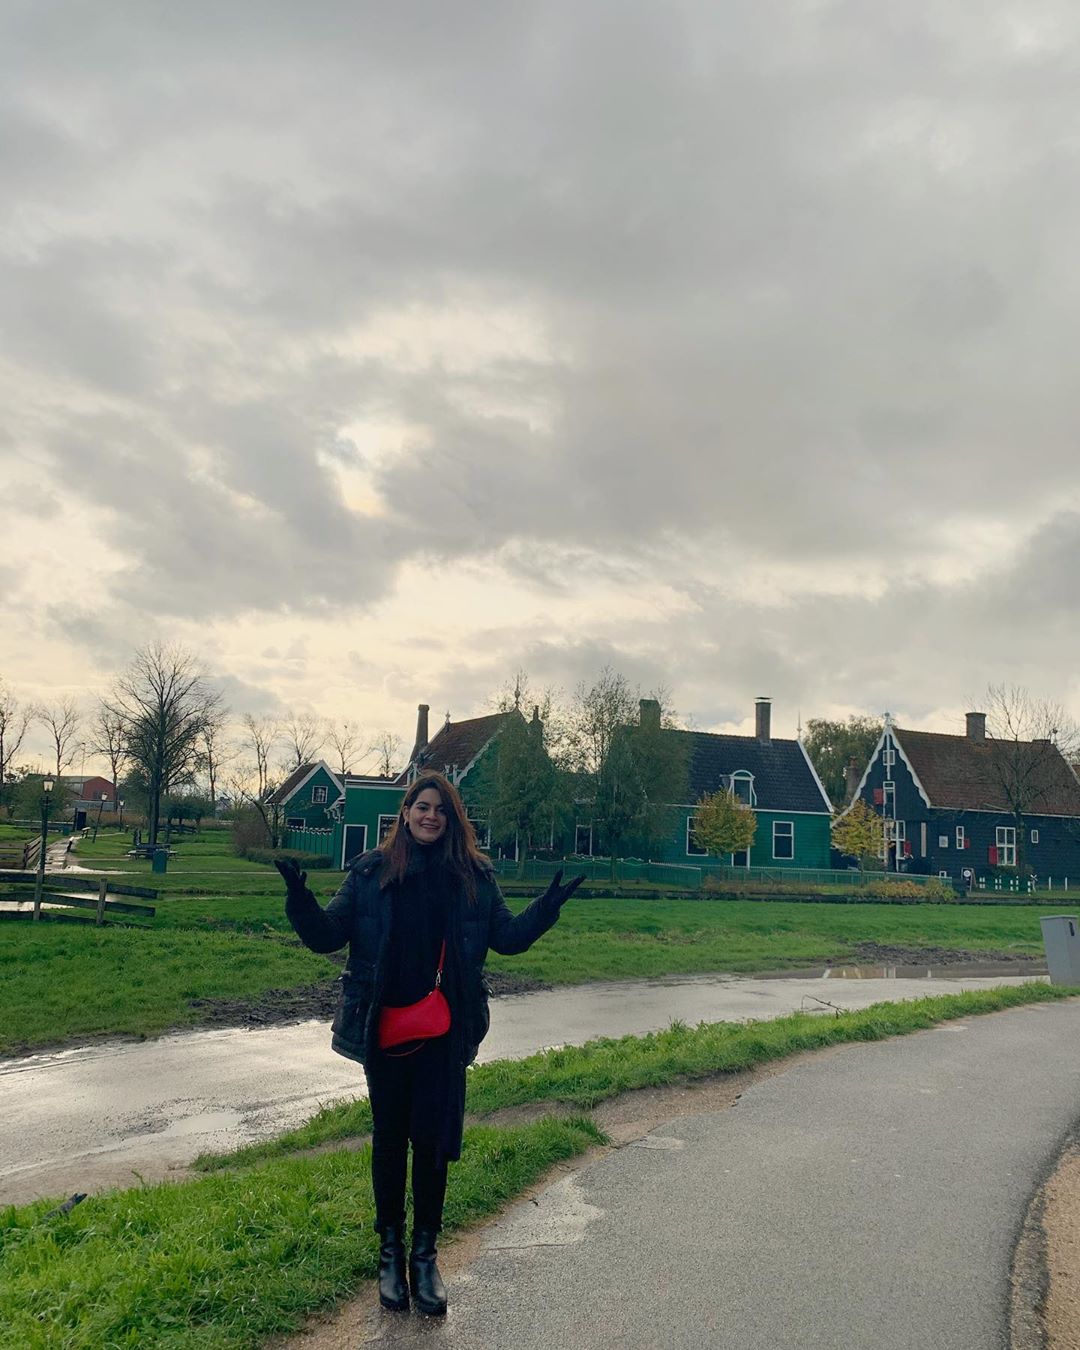 Latest Beautiful Clicks of Minal Khan from Her Trip to Amsterdam